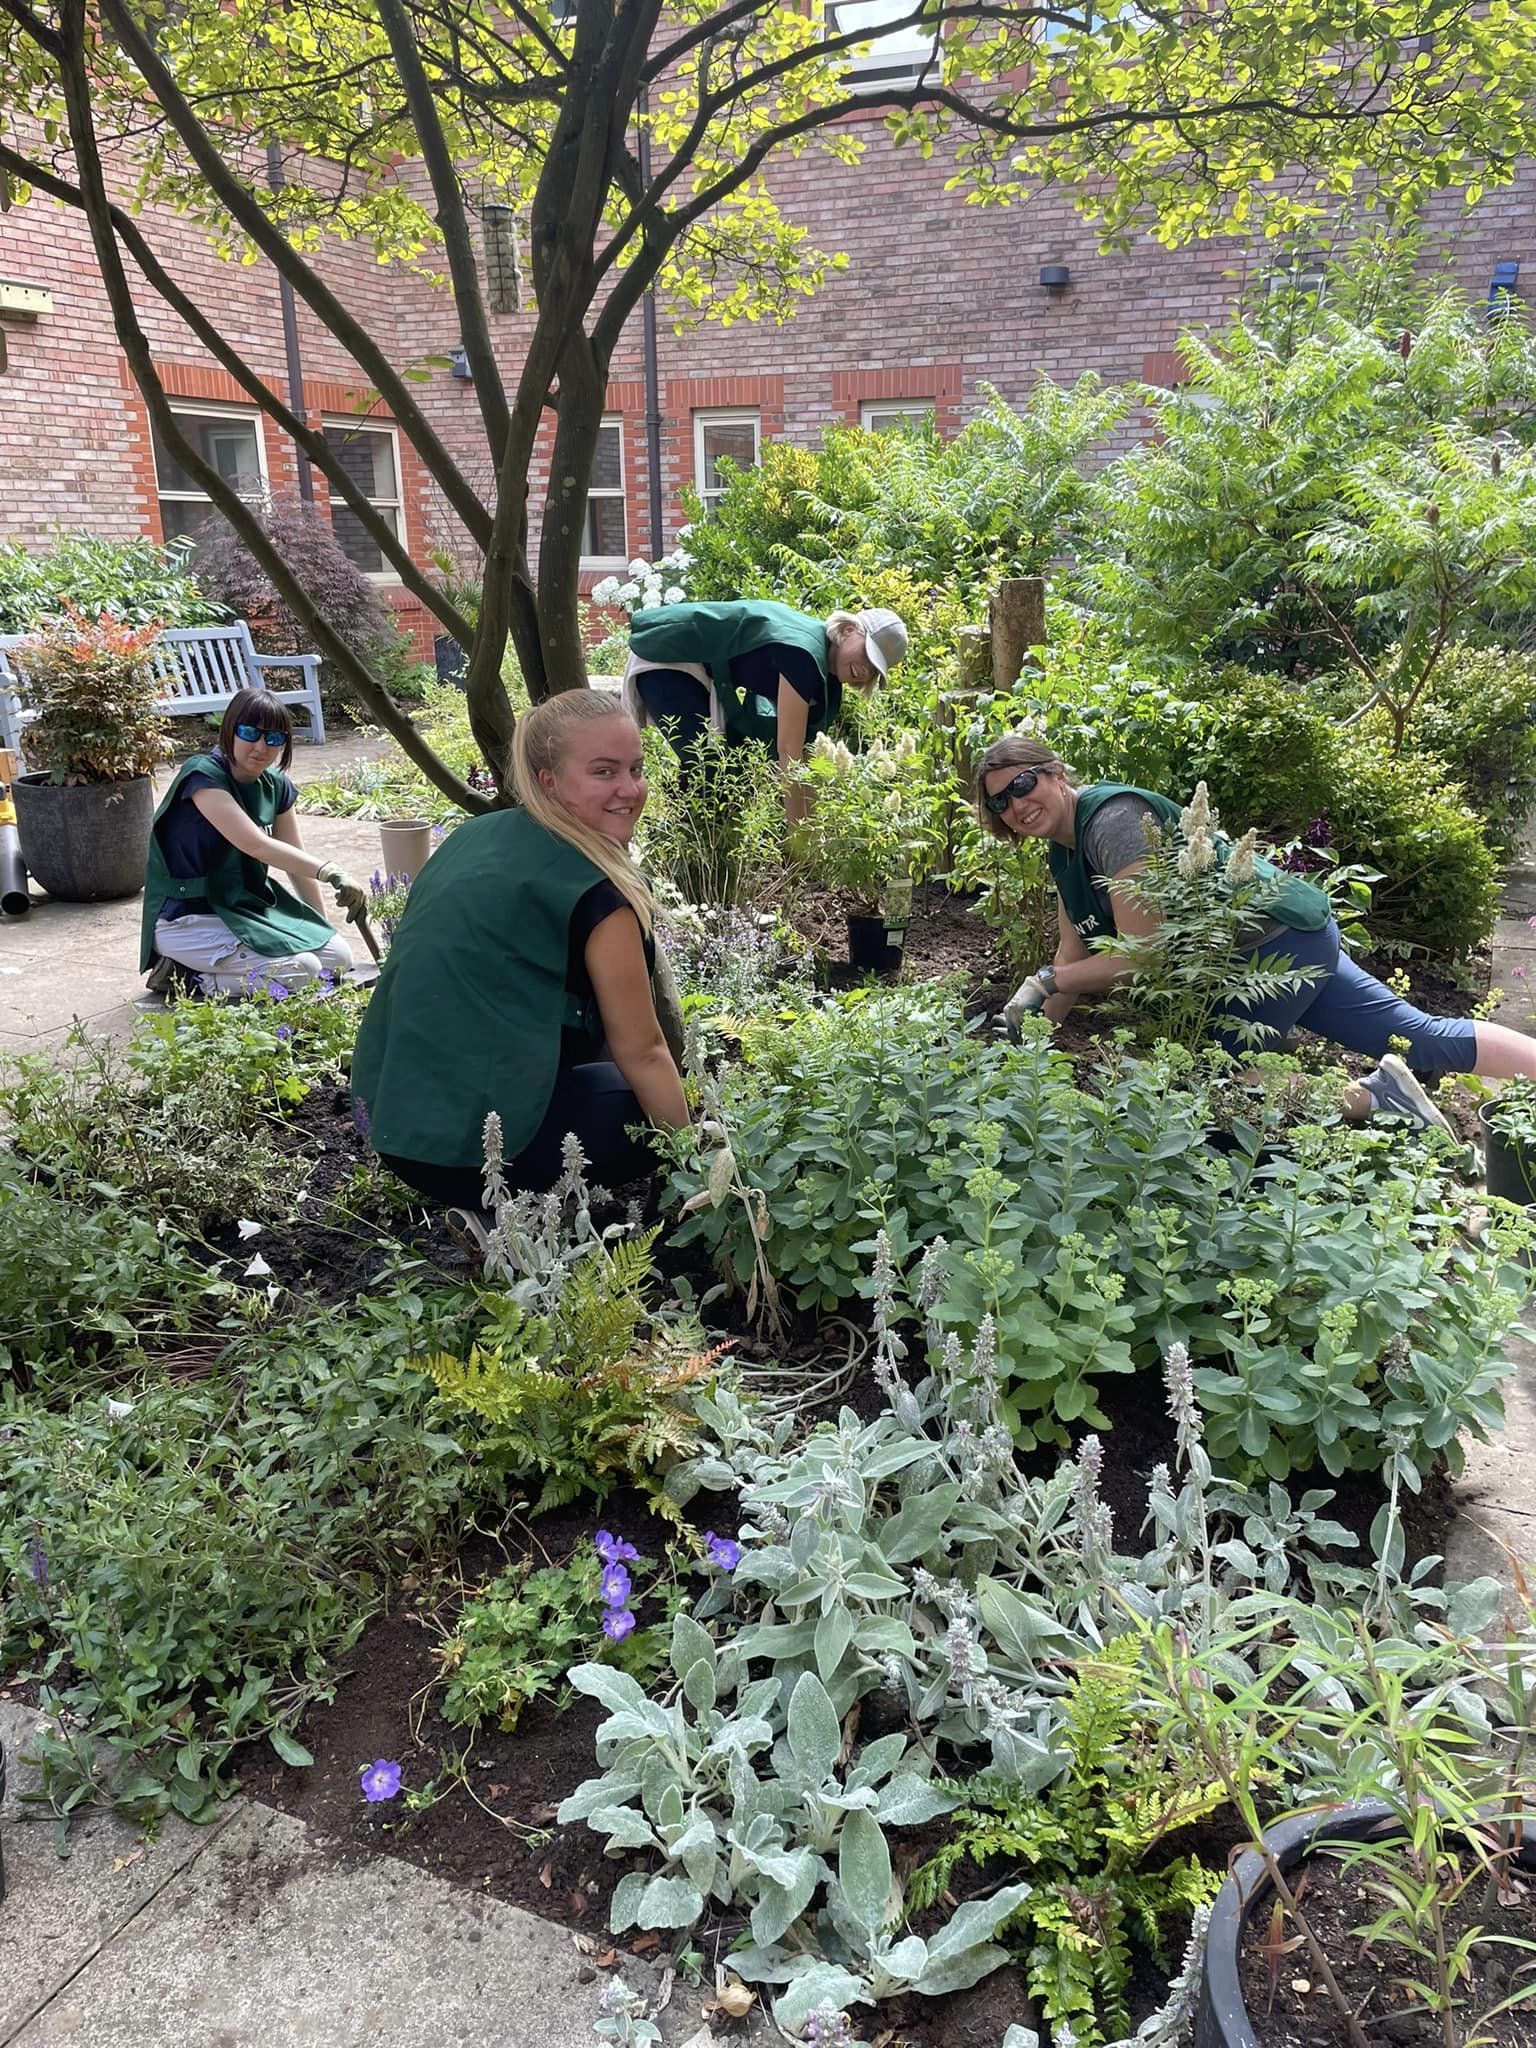 Four volunteers in green tabards, amongst various plants completing assorted tasks such as weeding and pruning.